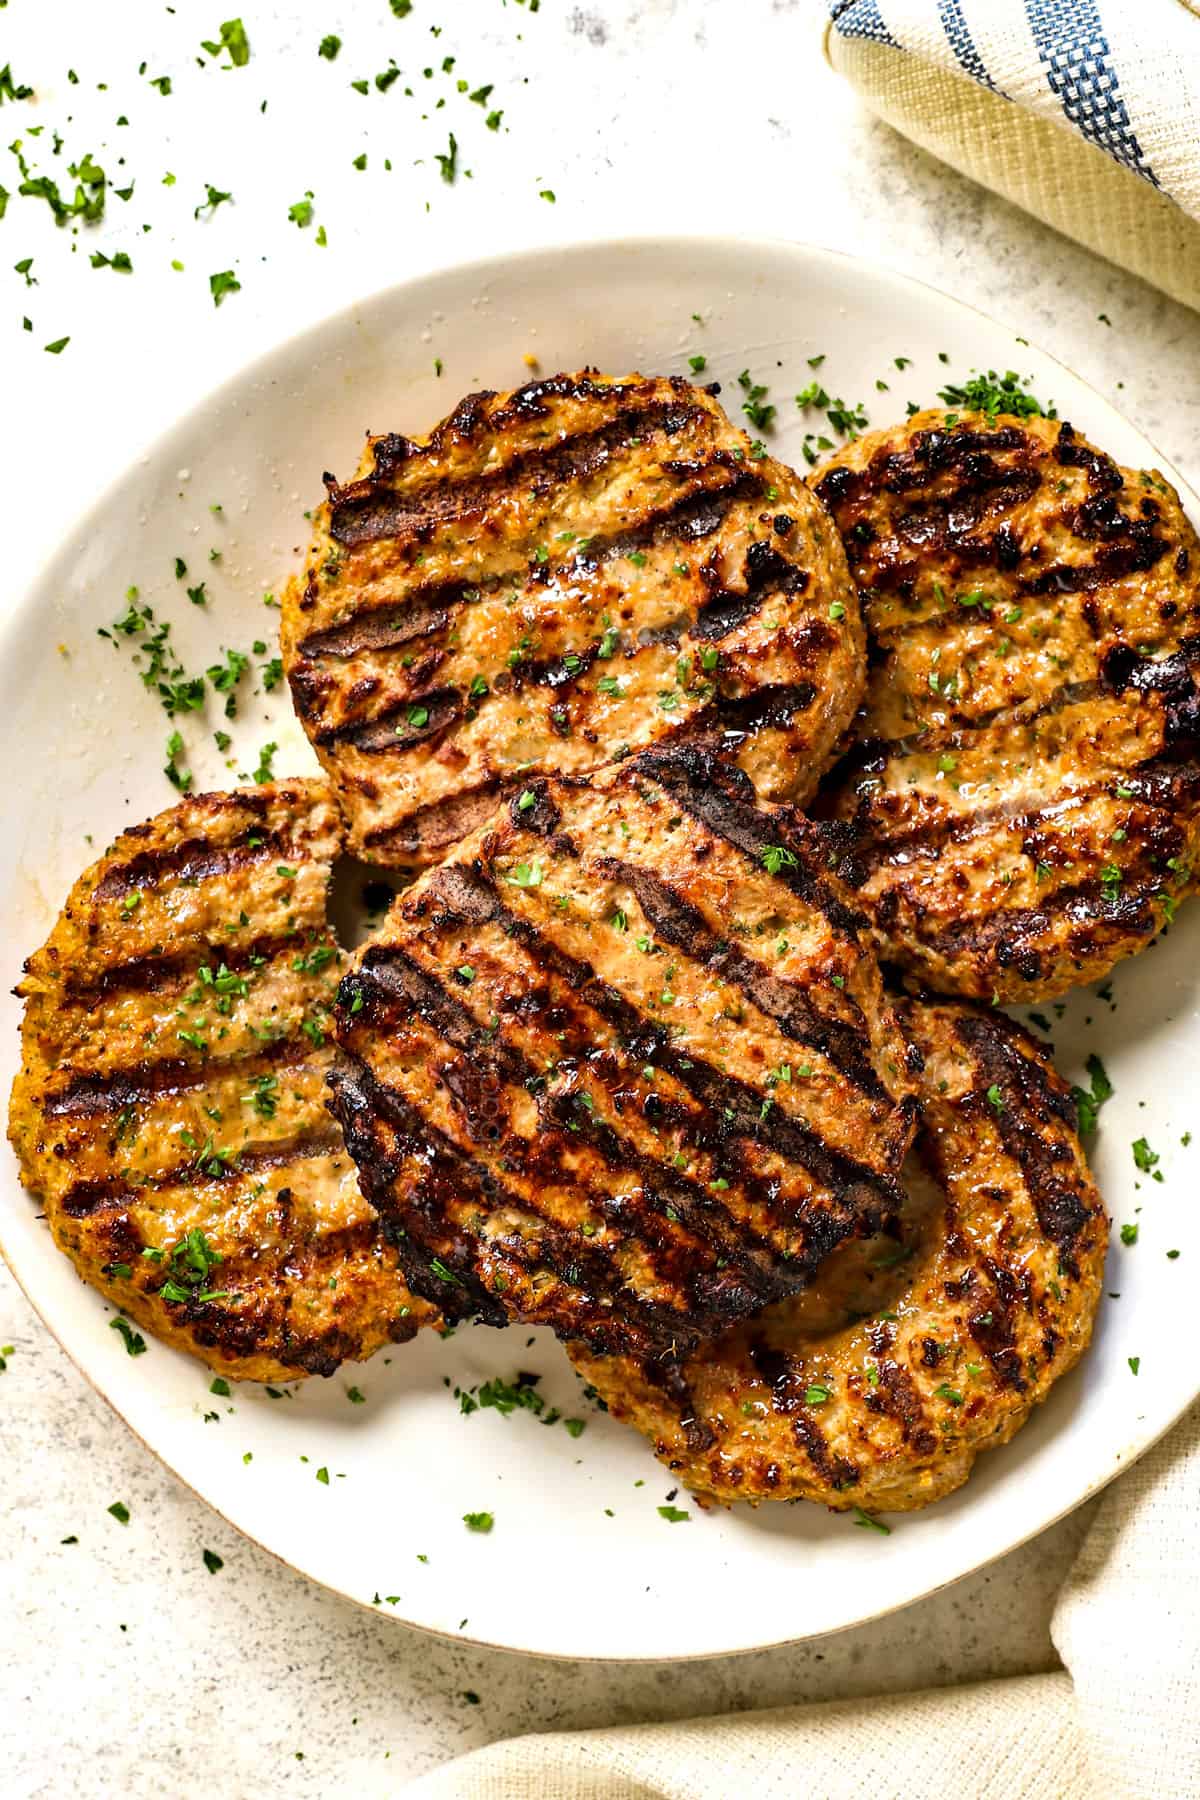 top view of turkey burgers recipe showing perfectly grilled patties